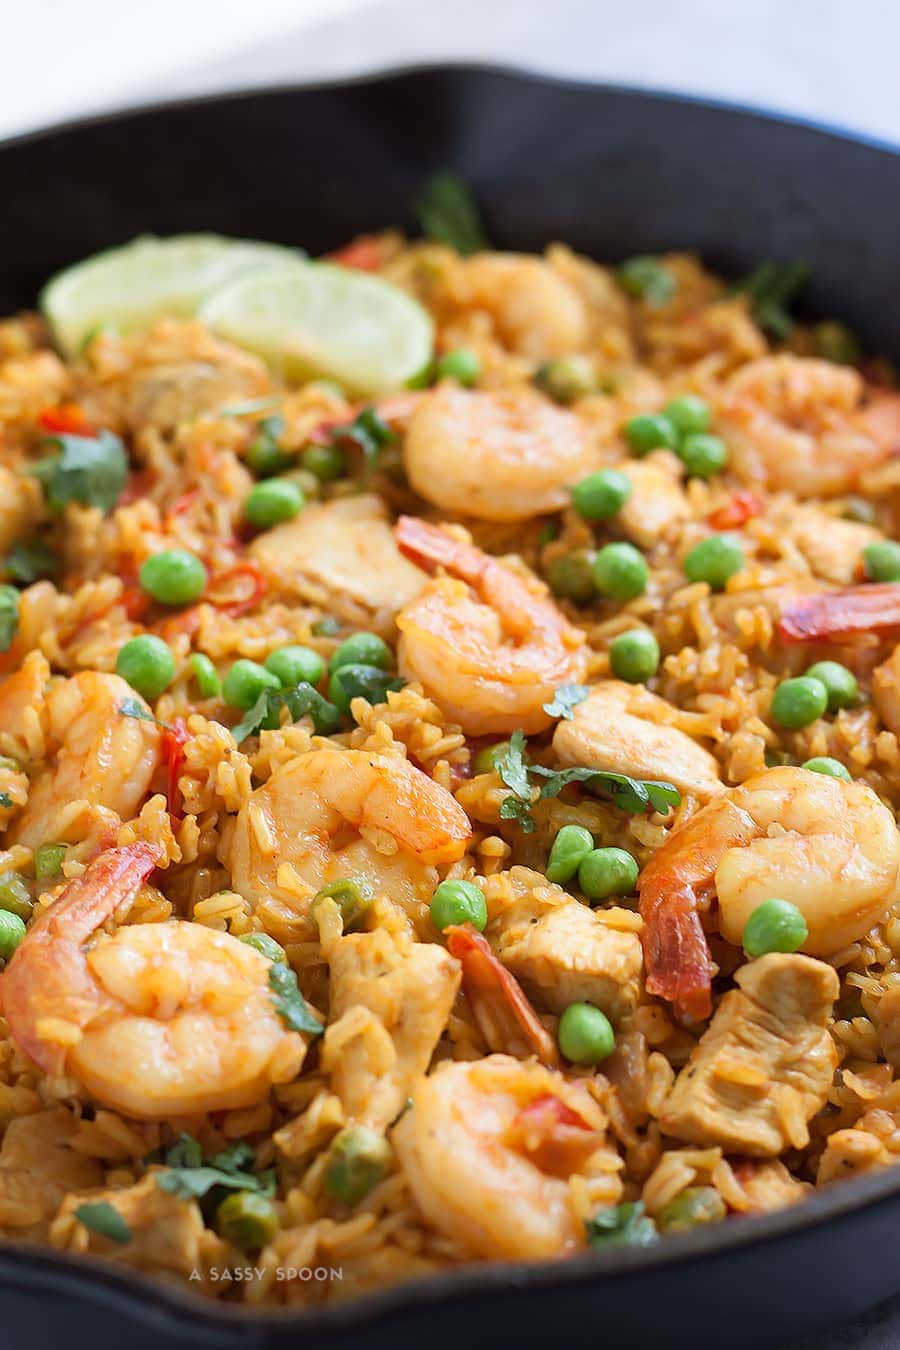 Chicken and shrimp paella in an iron skillet